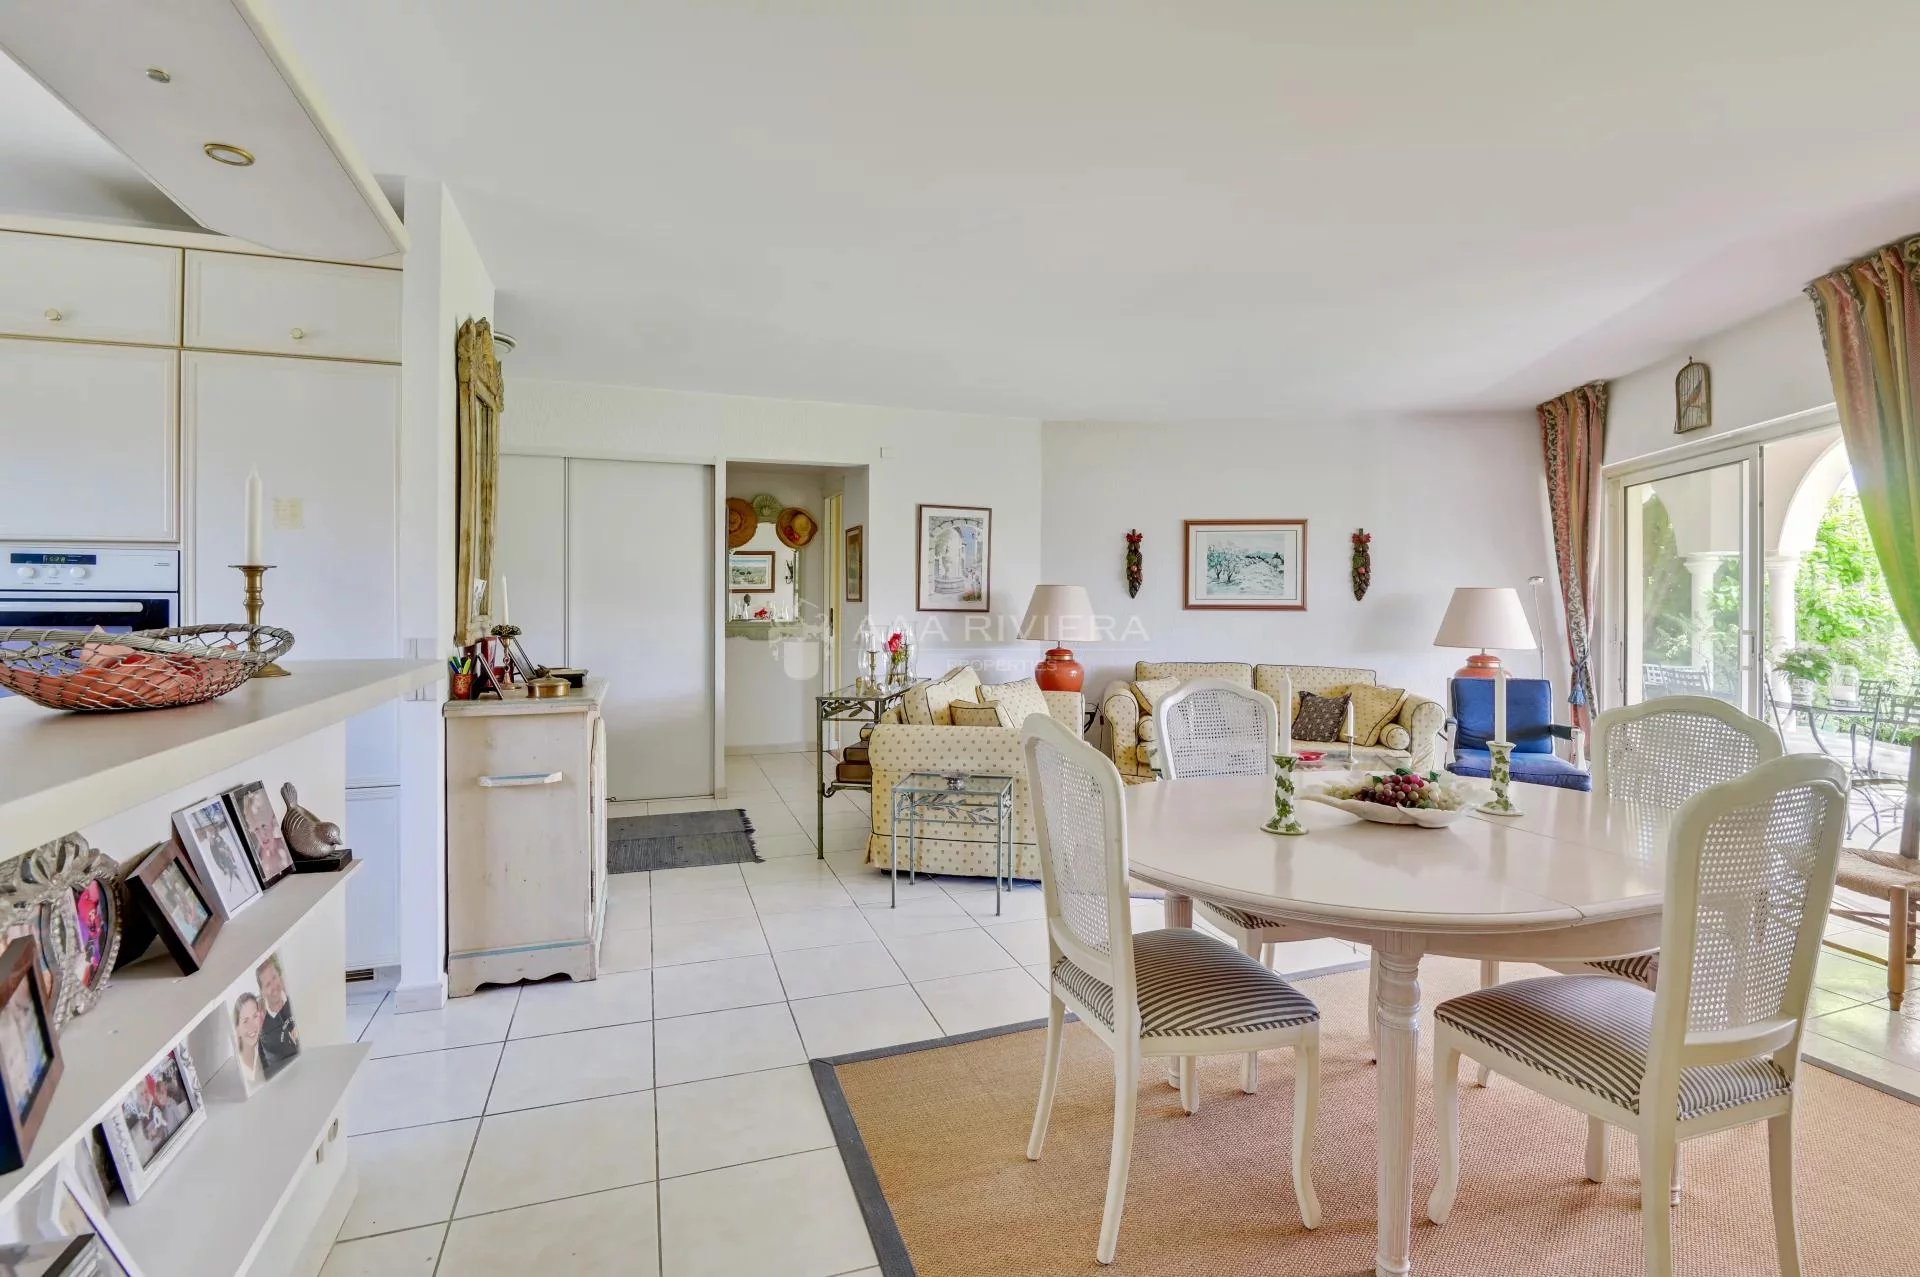 SOLD - SOLE AGENT - Mandelieu close to Cannes - Lovely 3 bed garden apartment. View, pool,  caretaker.